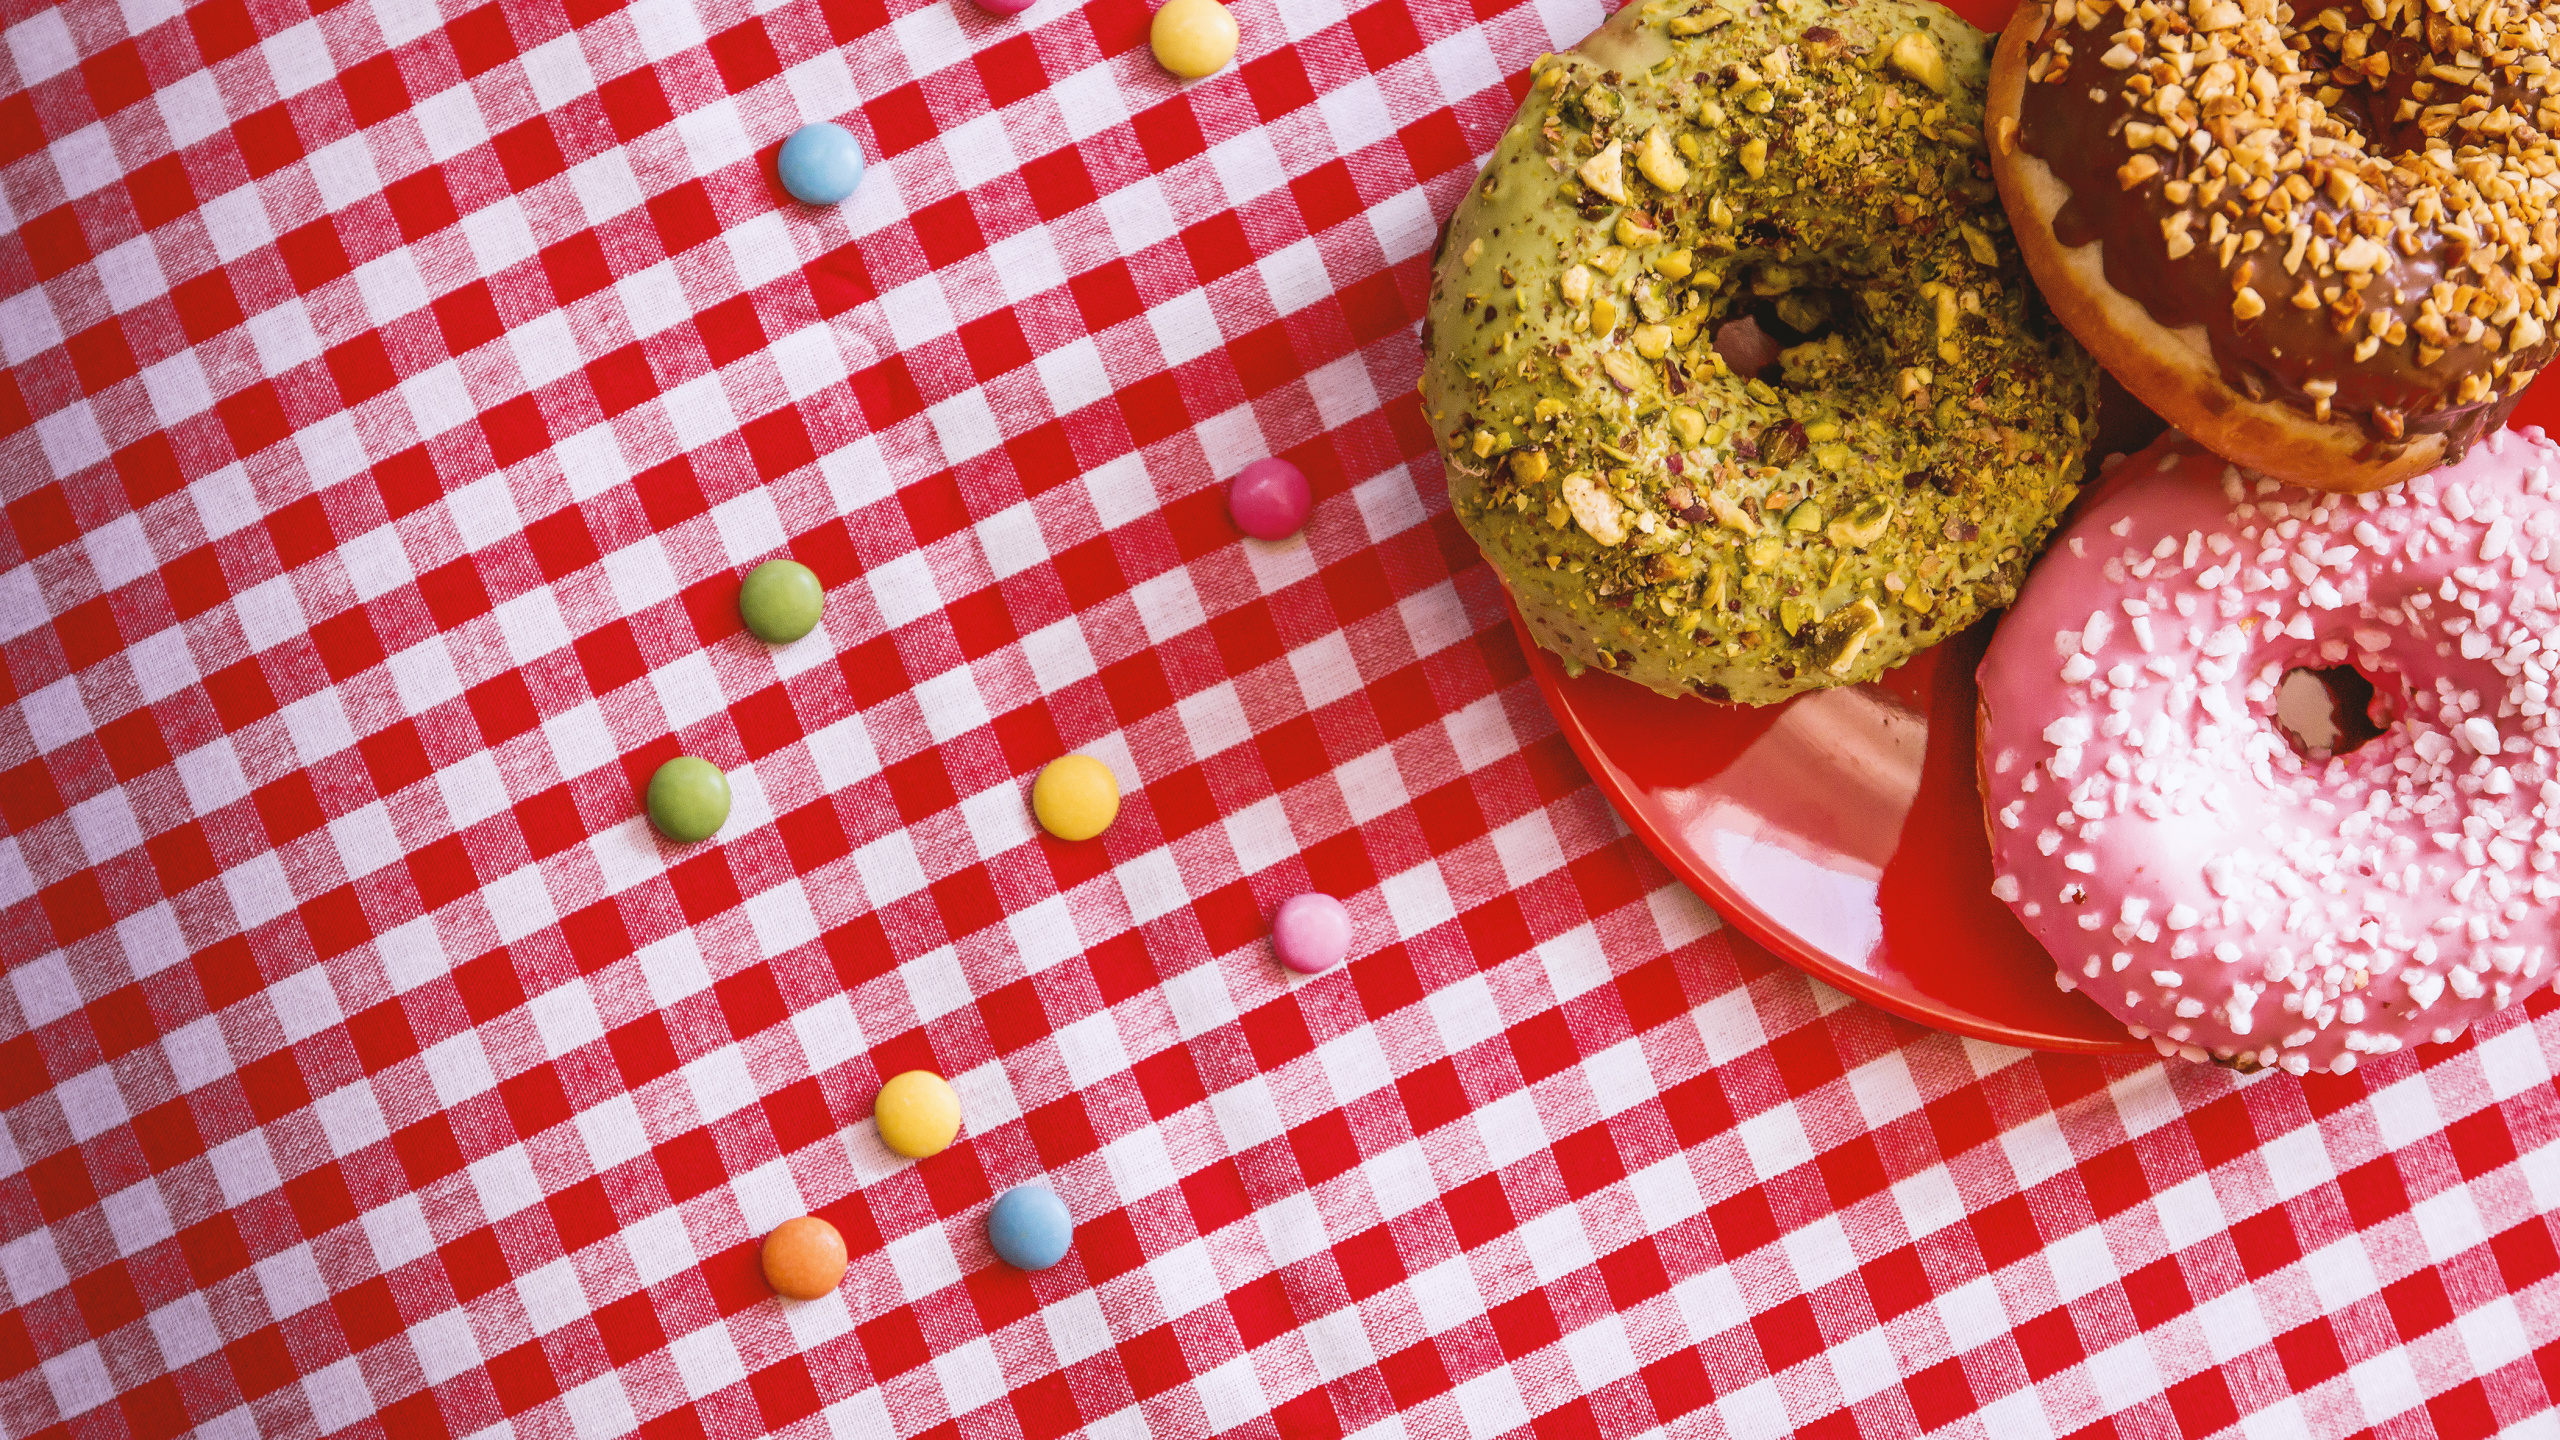 Brown Doughnut on Red and White Checkered Table Cloth. Wallpaper in 2560x1440 Resolution